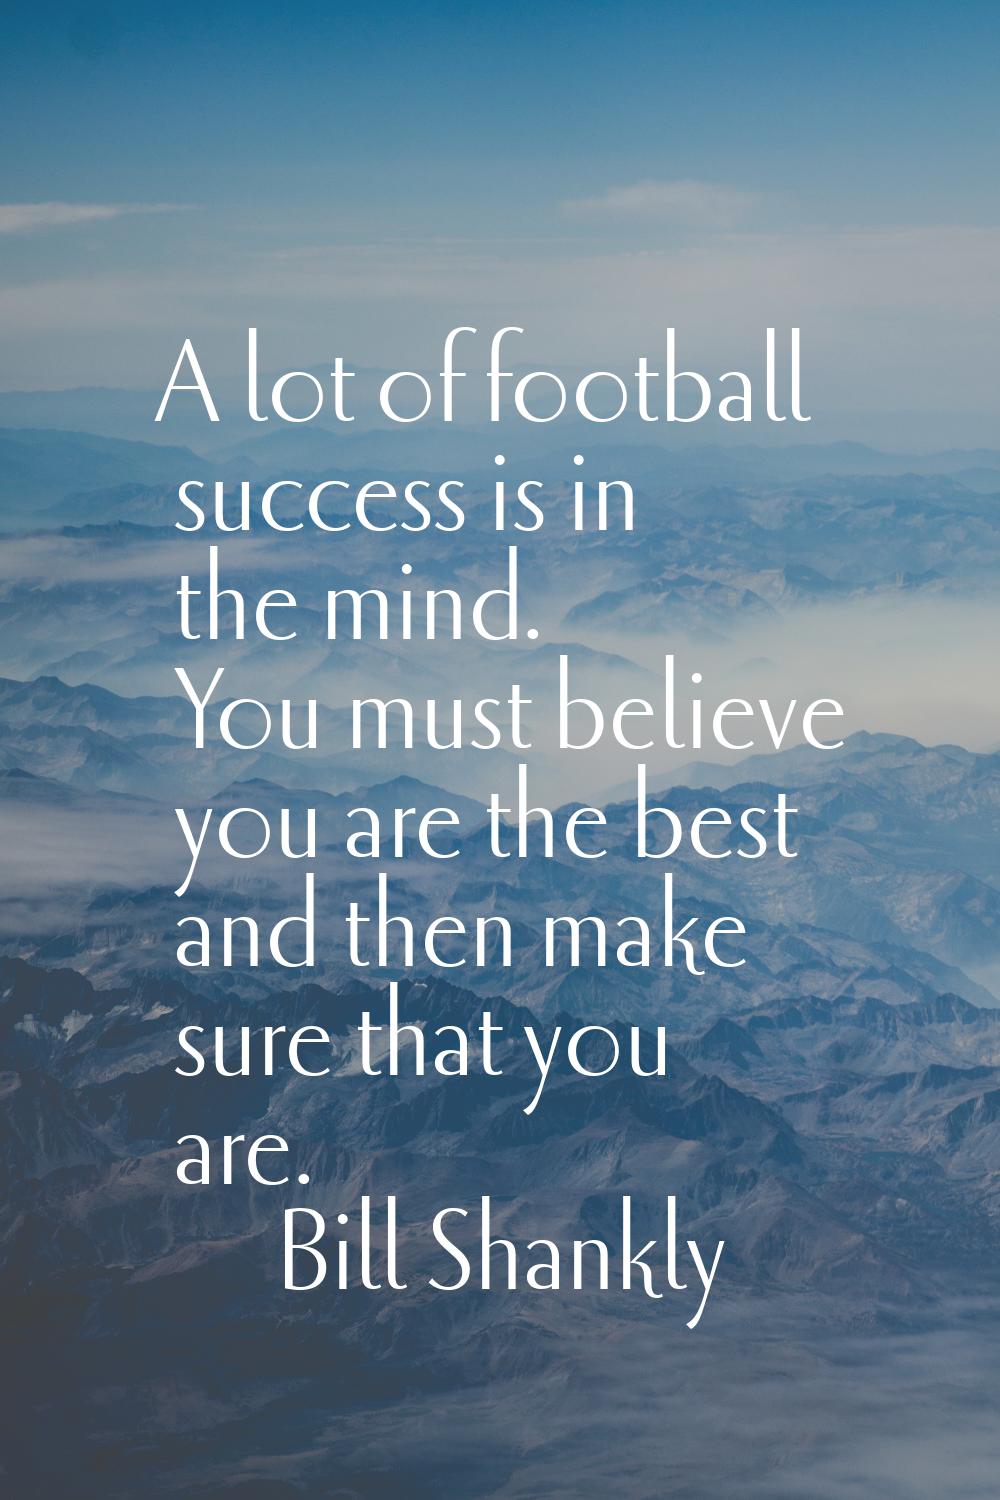 A lot of football success is in the mind. You must believe you are the best and then make sure that